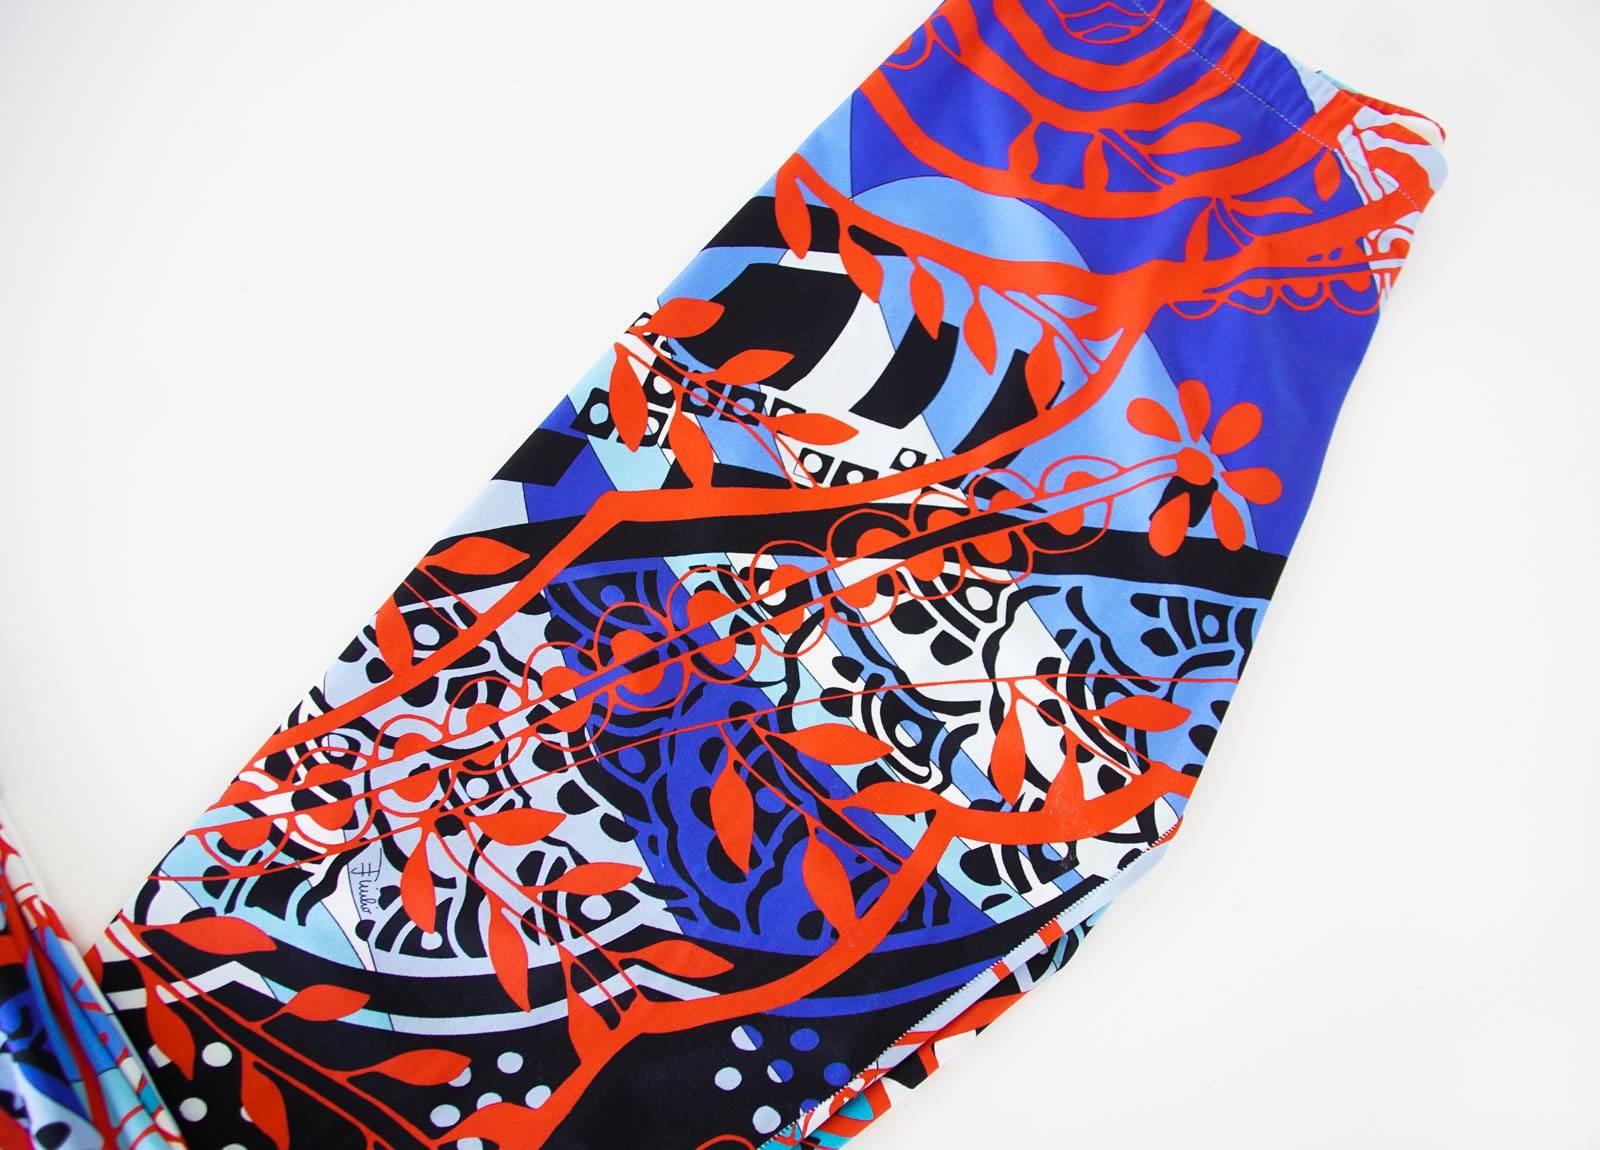 Guaranteed authentic EMILIO PUCCI multicolored leggings.
Slinky stretch ankle length legging in a vivid abstract print.
In shades of blue, red, black and white.
Fabric is polyamide and elastane.
final sale

SIZE 40
USA SIZE 6

PANT MEASURES:
LENGTH 